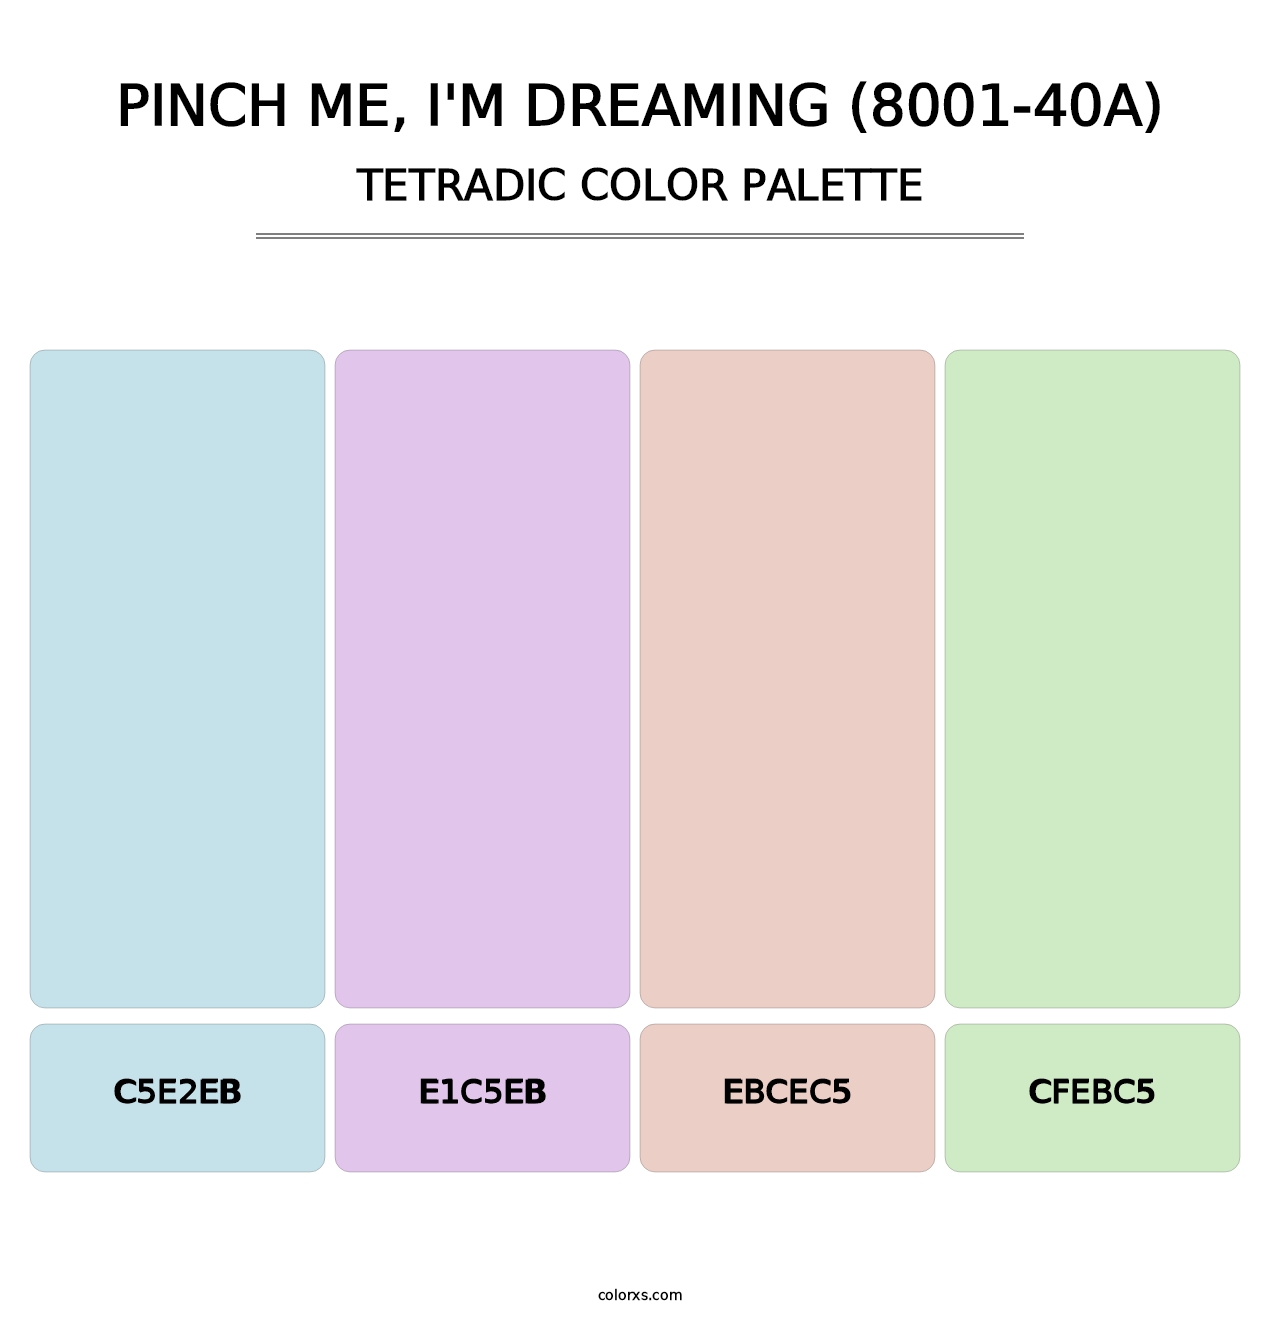 Pinch Me, I'm Dreaming (8001-40A) - Tetradic Color Palette